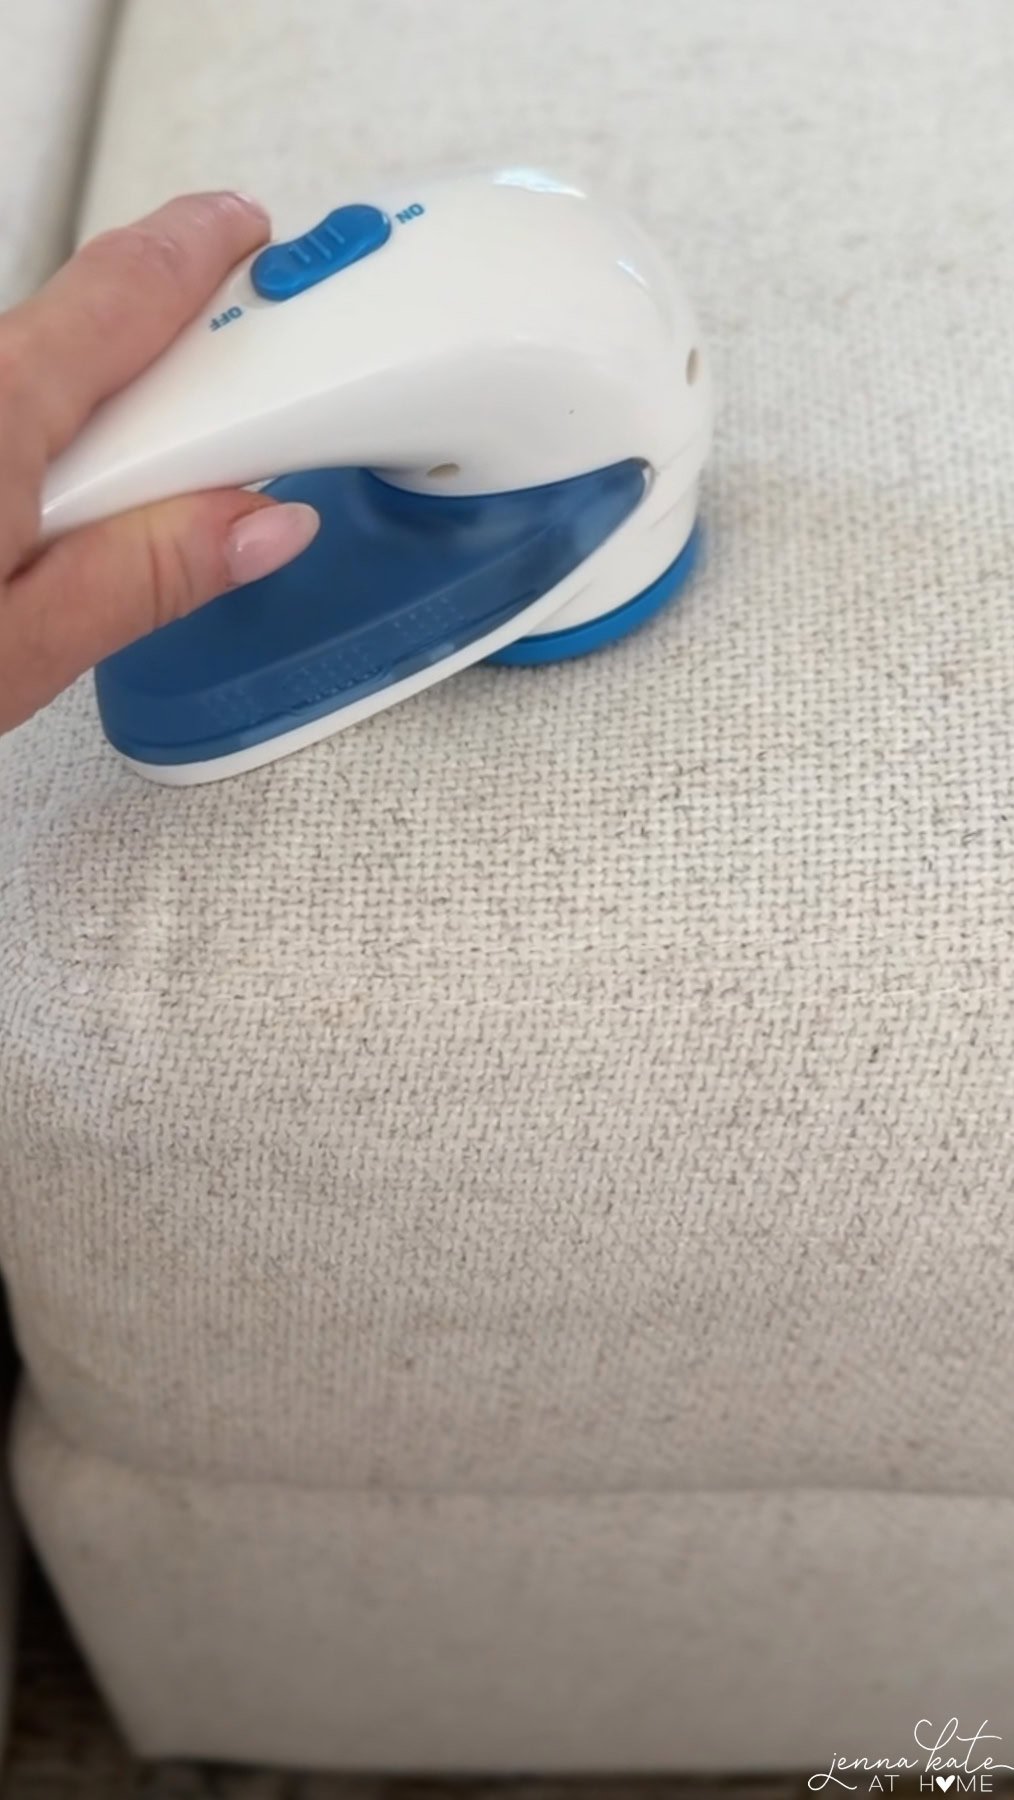 Fabric shaver removing pills from a couch cushion.